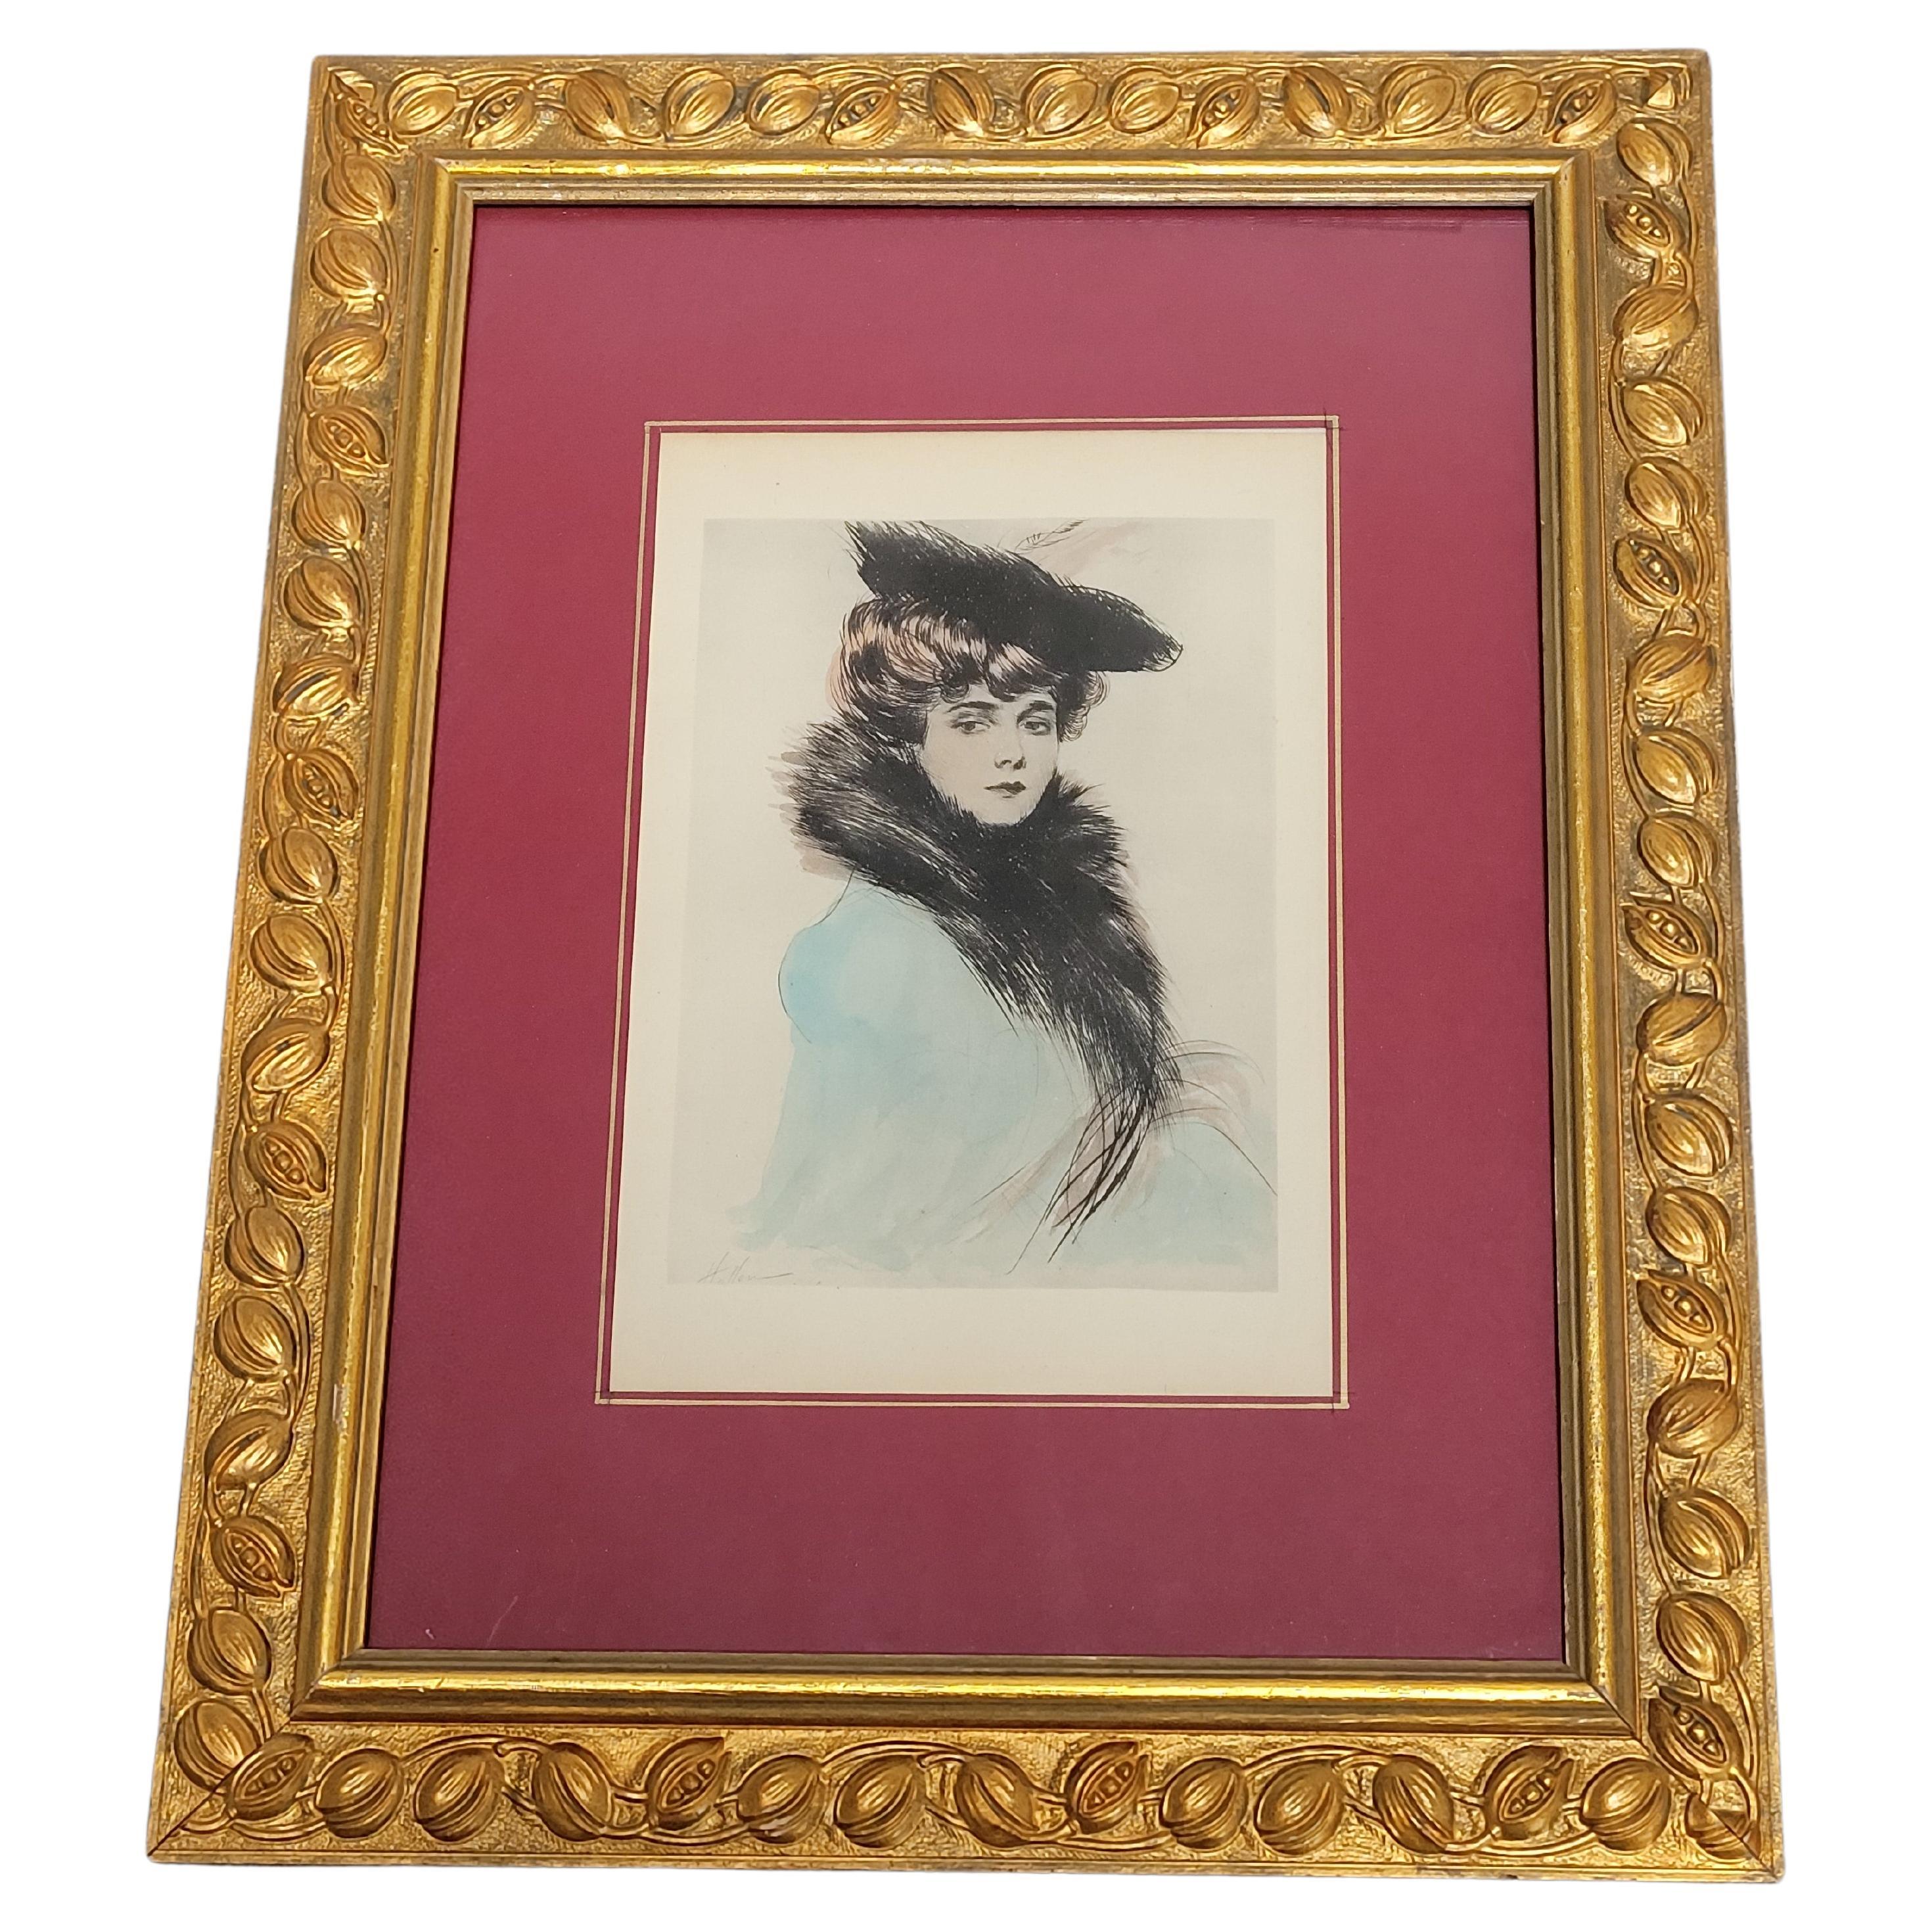 Helleu, Watercolor Lithograph, Portrait of Mme Chéruit, Early 20th Century